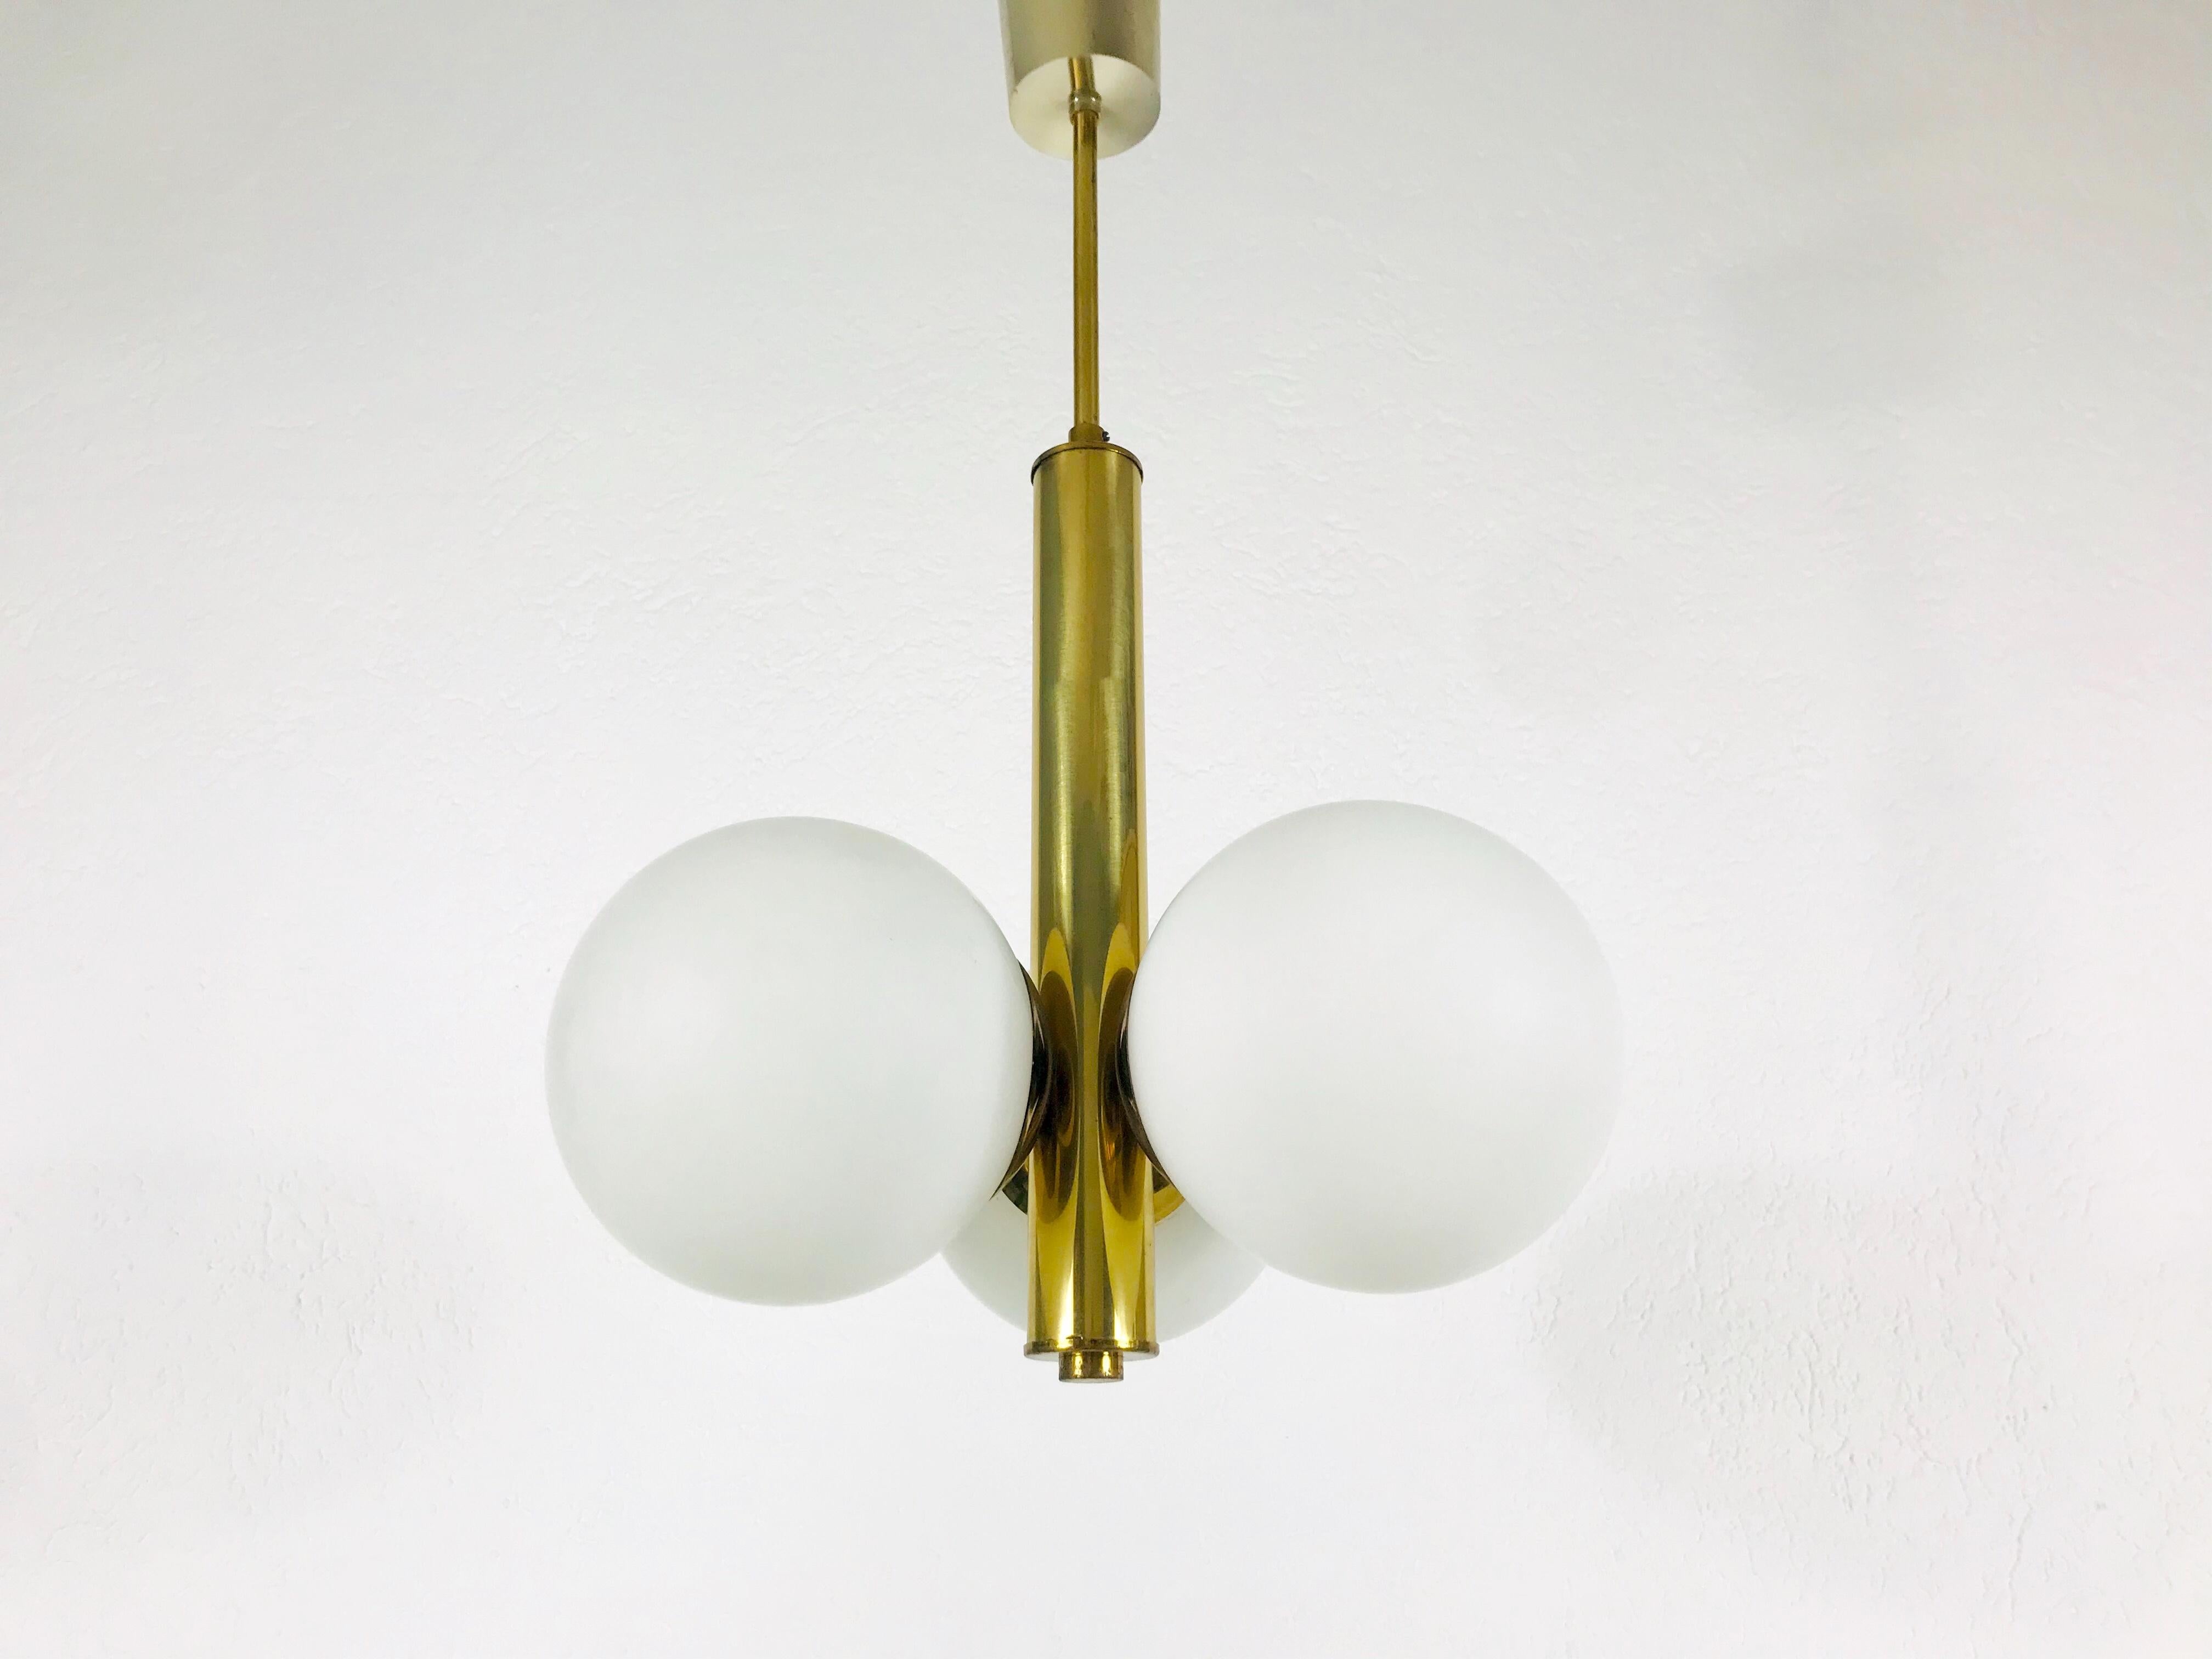 Metal Mid-Century Modern Golden Kaiser 3-Arm Space Age Chandelier, 1960s, Germany For Sale